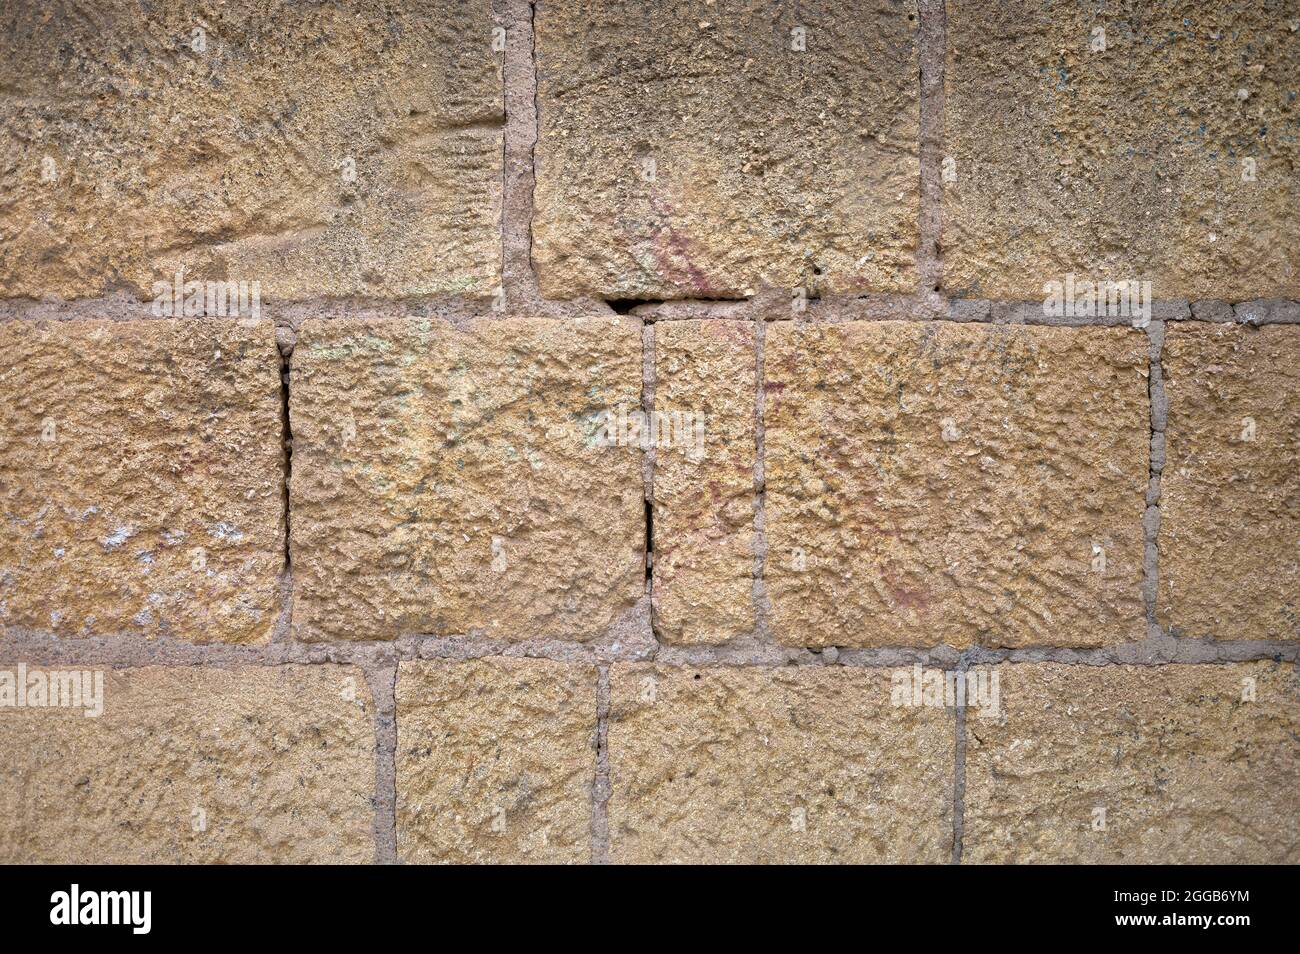 detail of a wall of ochre, brown and beige masonry and mortar stones Stock Photo